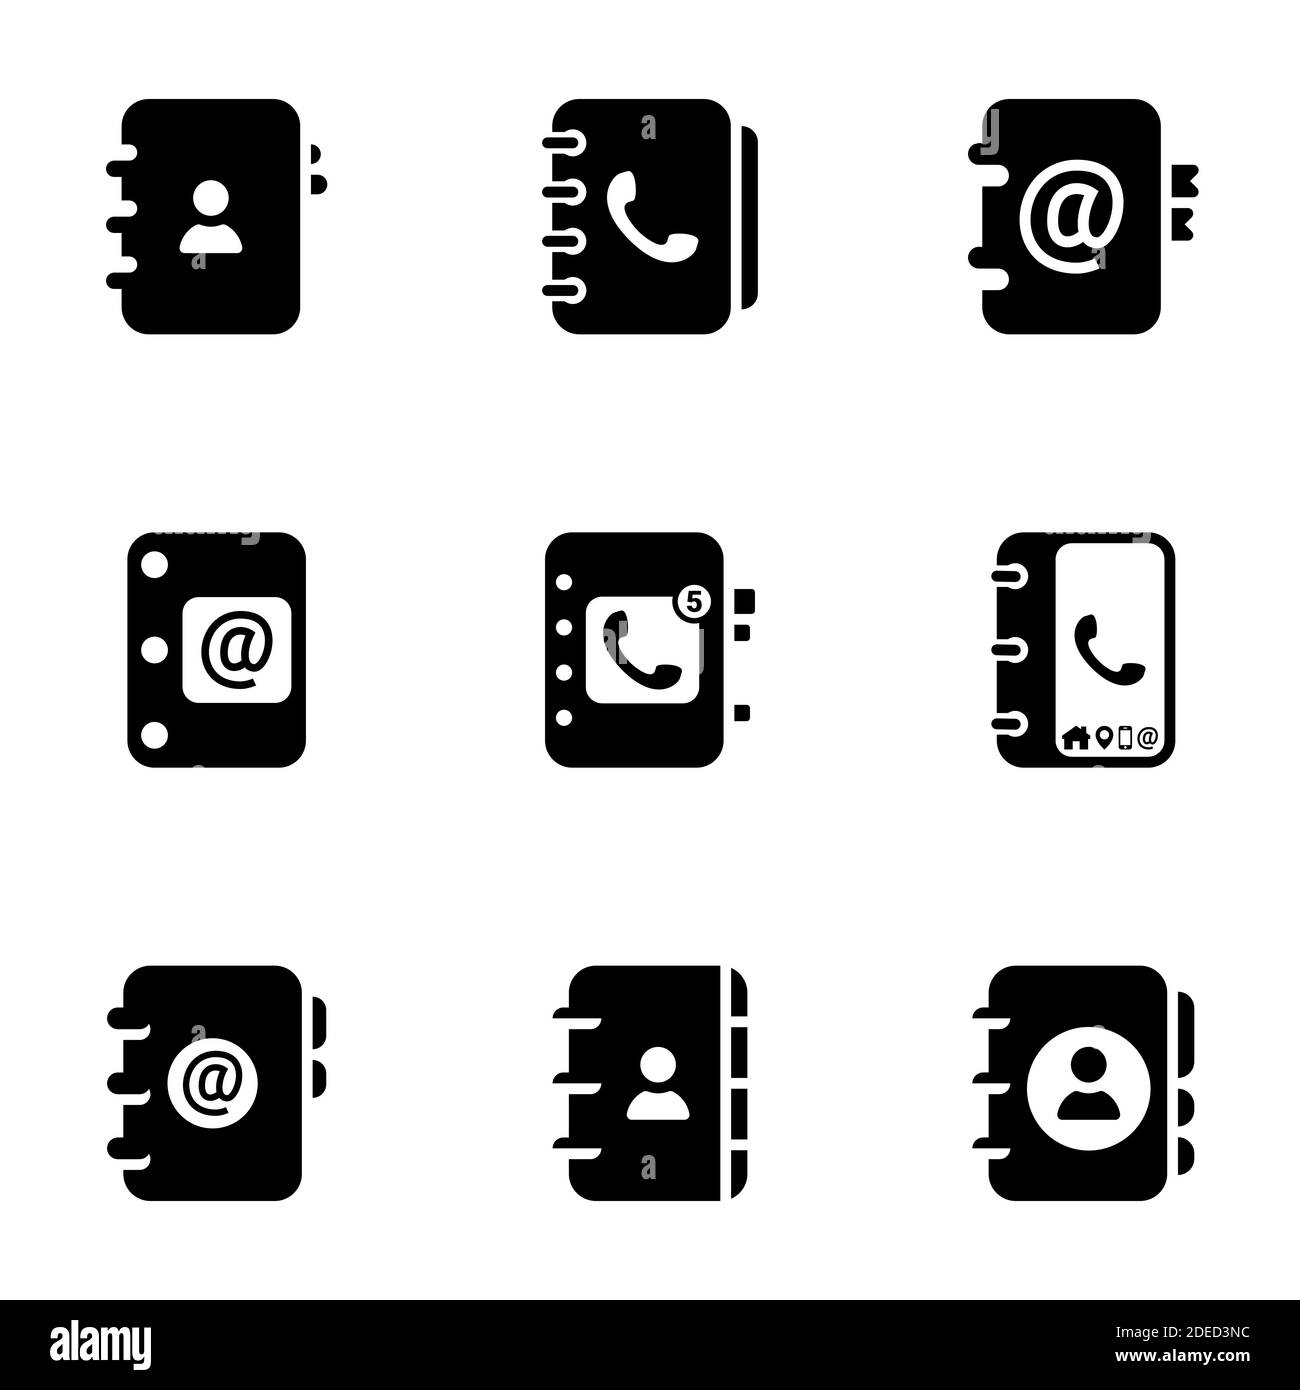 Set of black icons isolated on white background, on theme Address Book Stock Vector